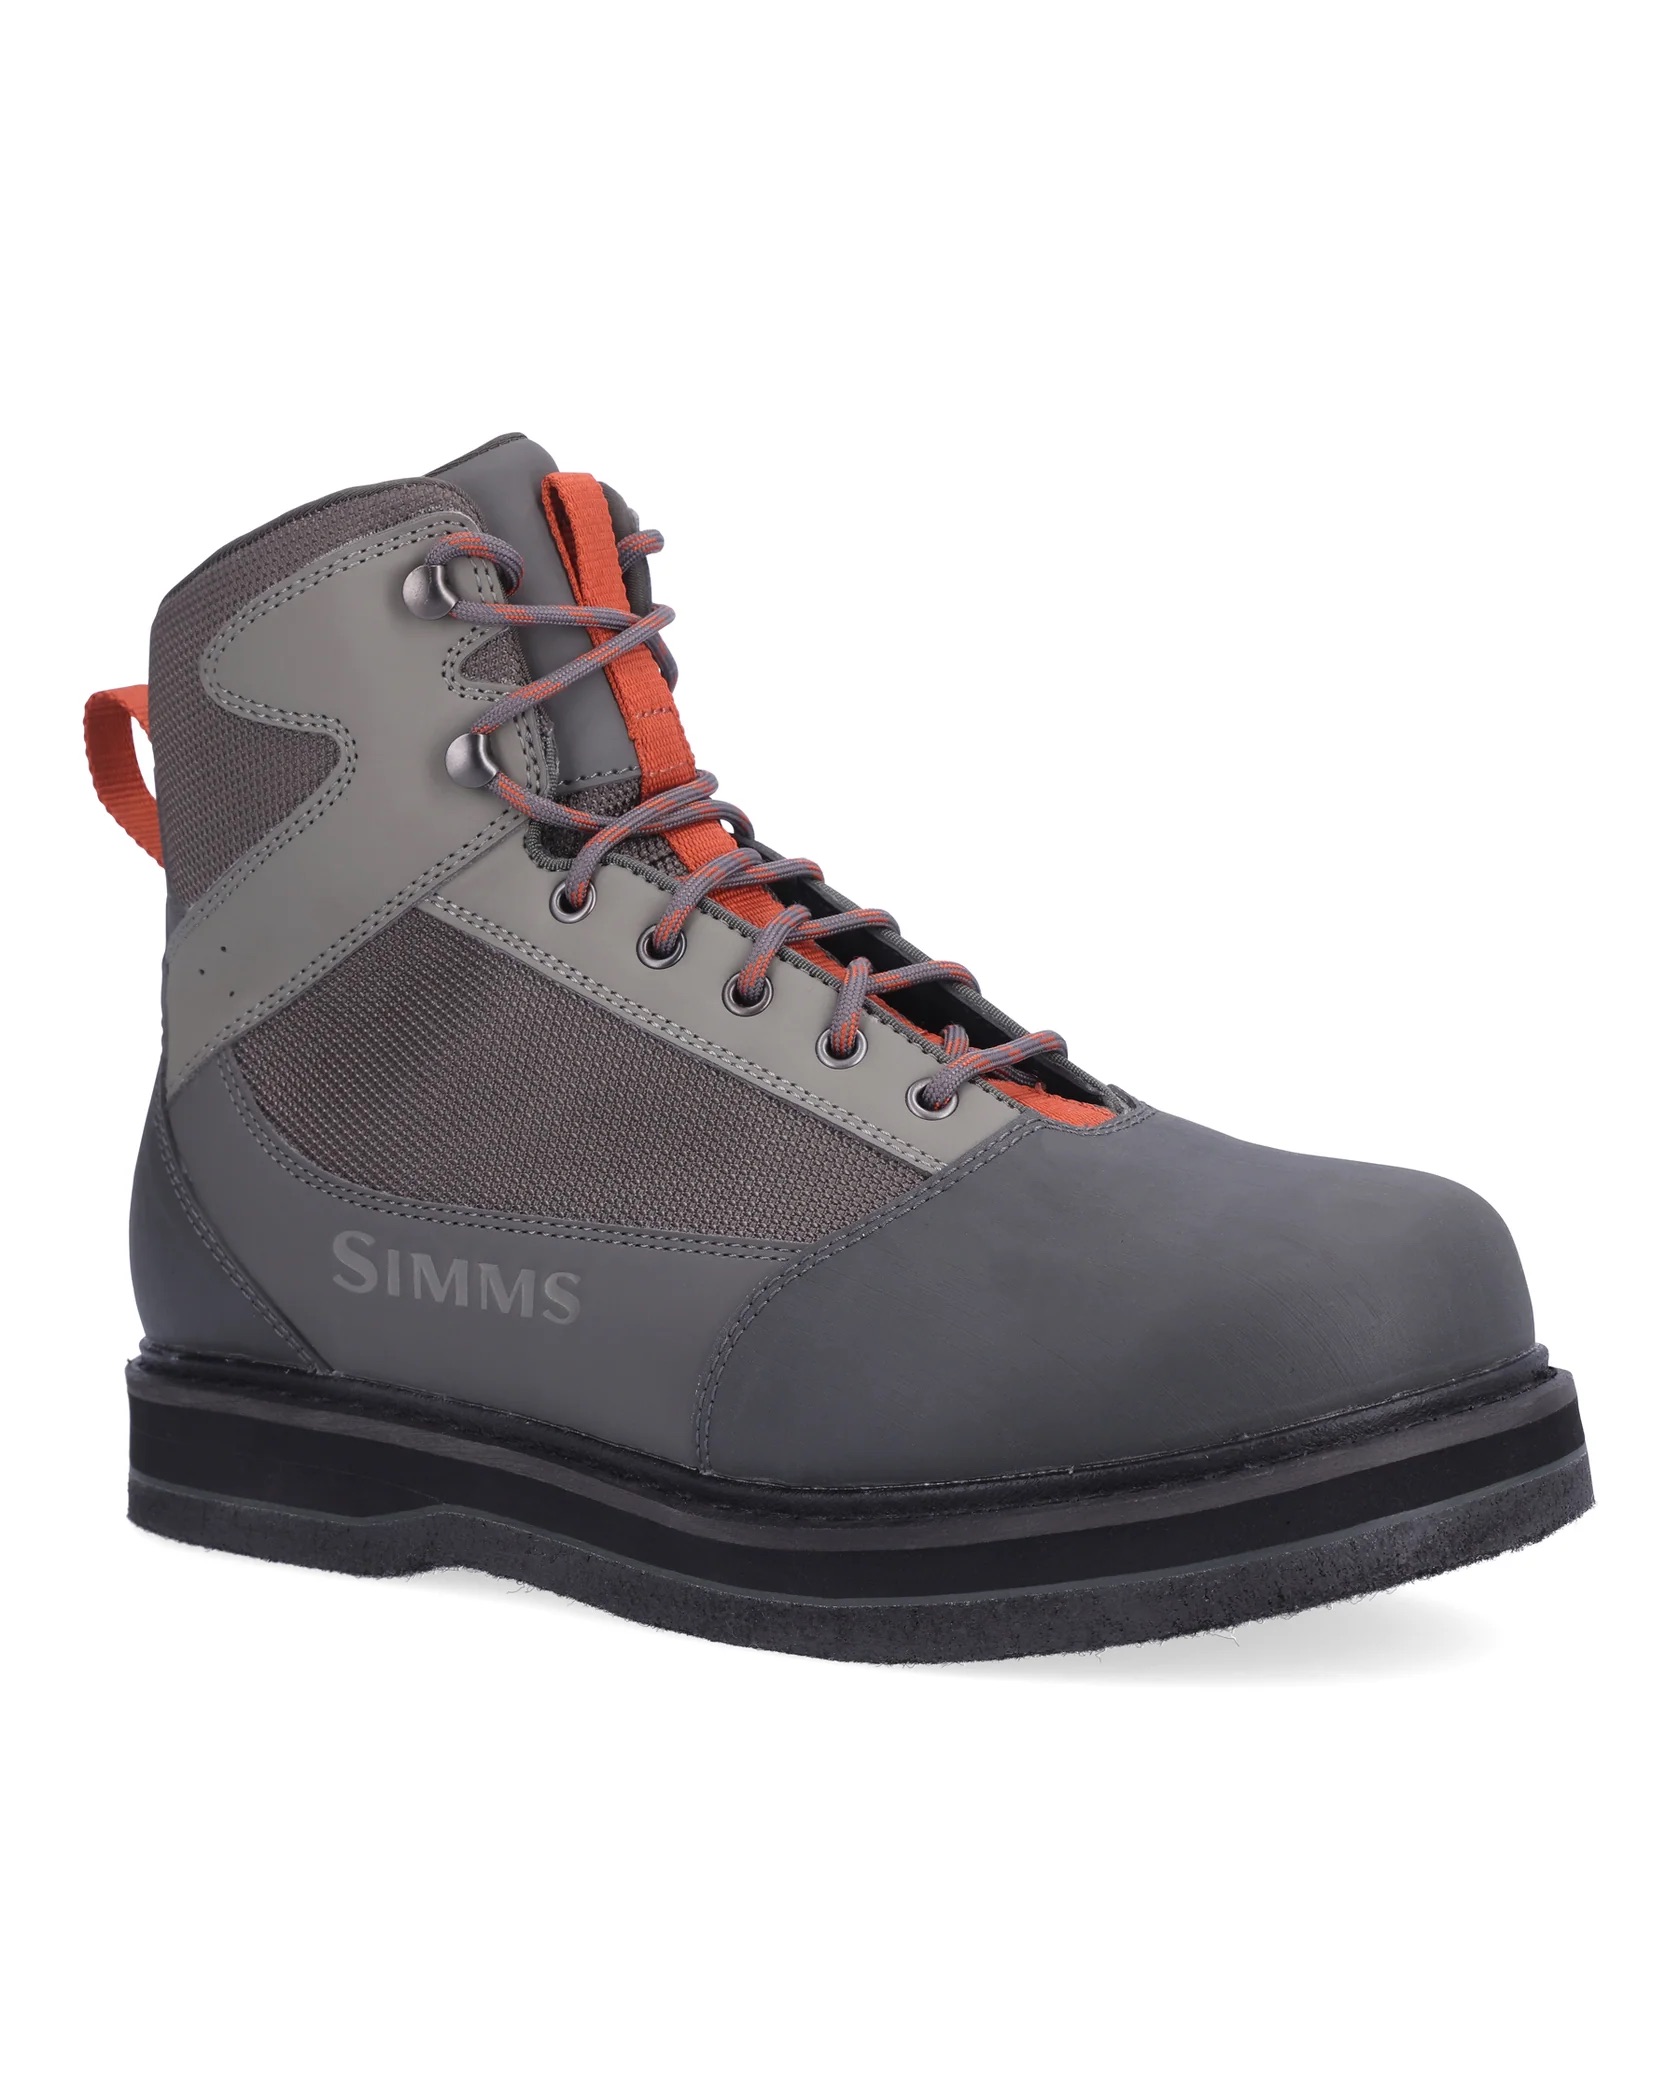 Simms Tributary Wading Boot - Felt - Size 8